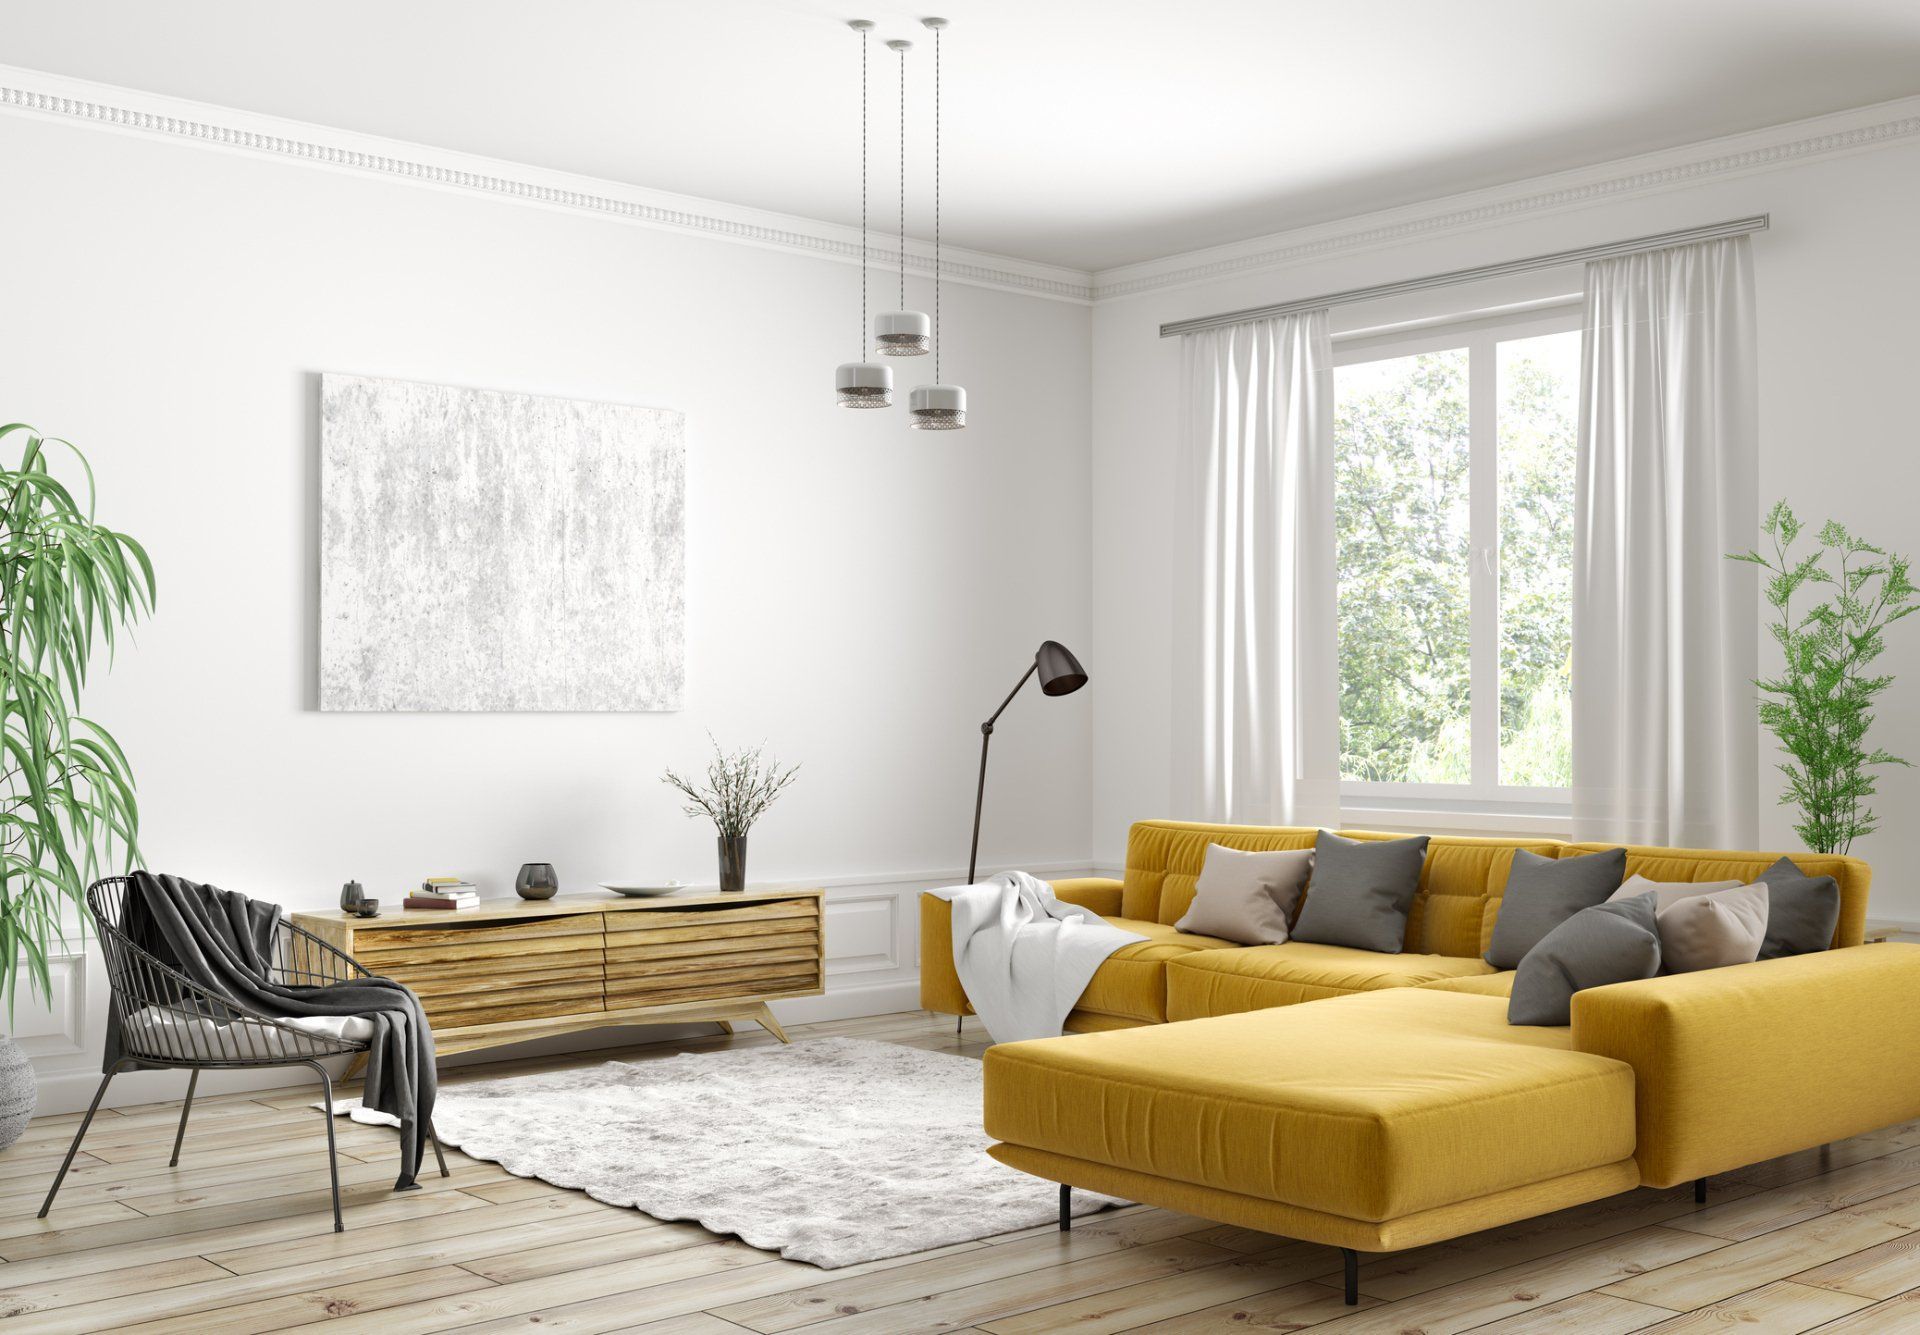 Living Room With Yellow Couch and White Curtains